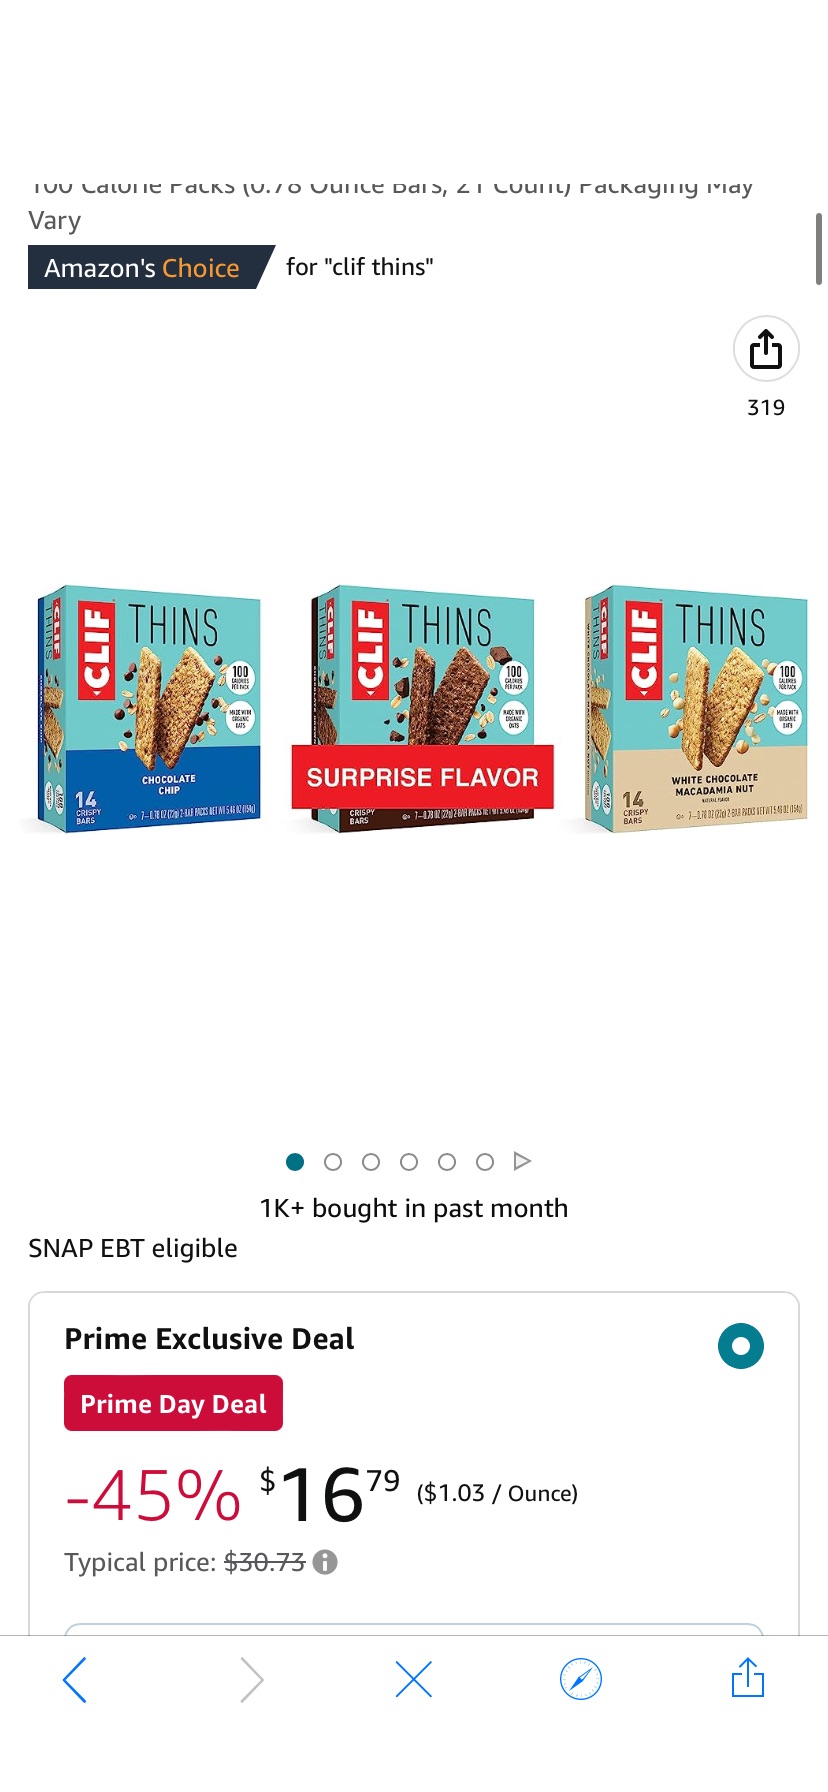 Amazon.com: Clif Bar - CLIF Thins多谷物能量薄饼 - Variety Pack - Thin and Crispy Snack Bars - 100 Calorie Packs (0.78 Ounce Bars, 21 Count) Packaging May Vary : Grocery & Gourmet Food